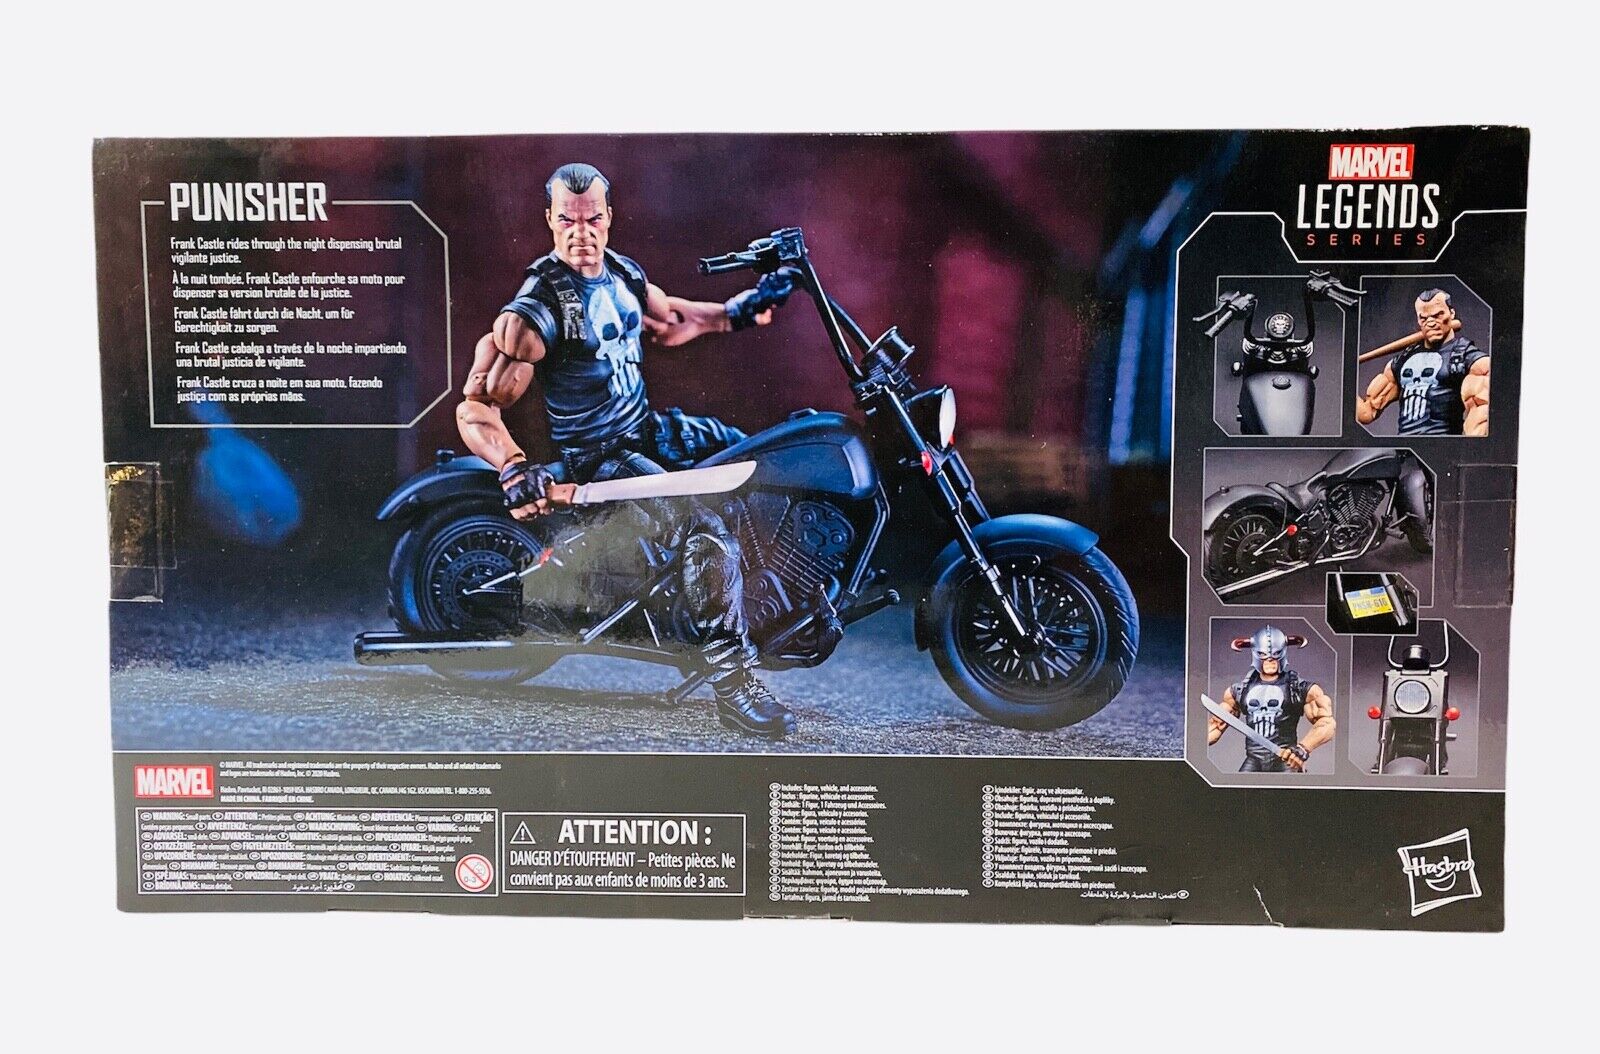 The Punisher with Motorcycle Marvel Legends Exclusives